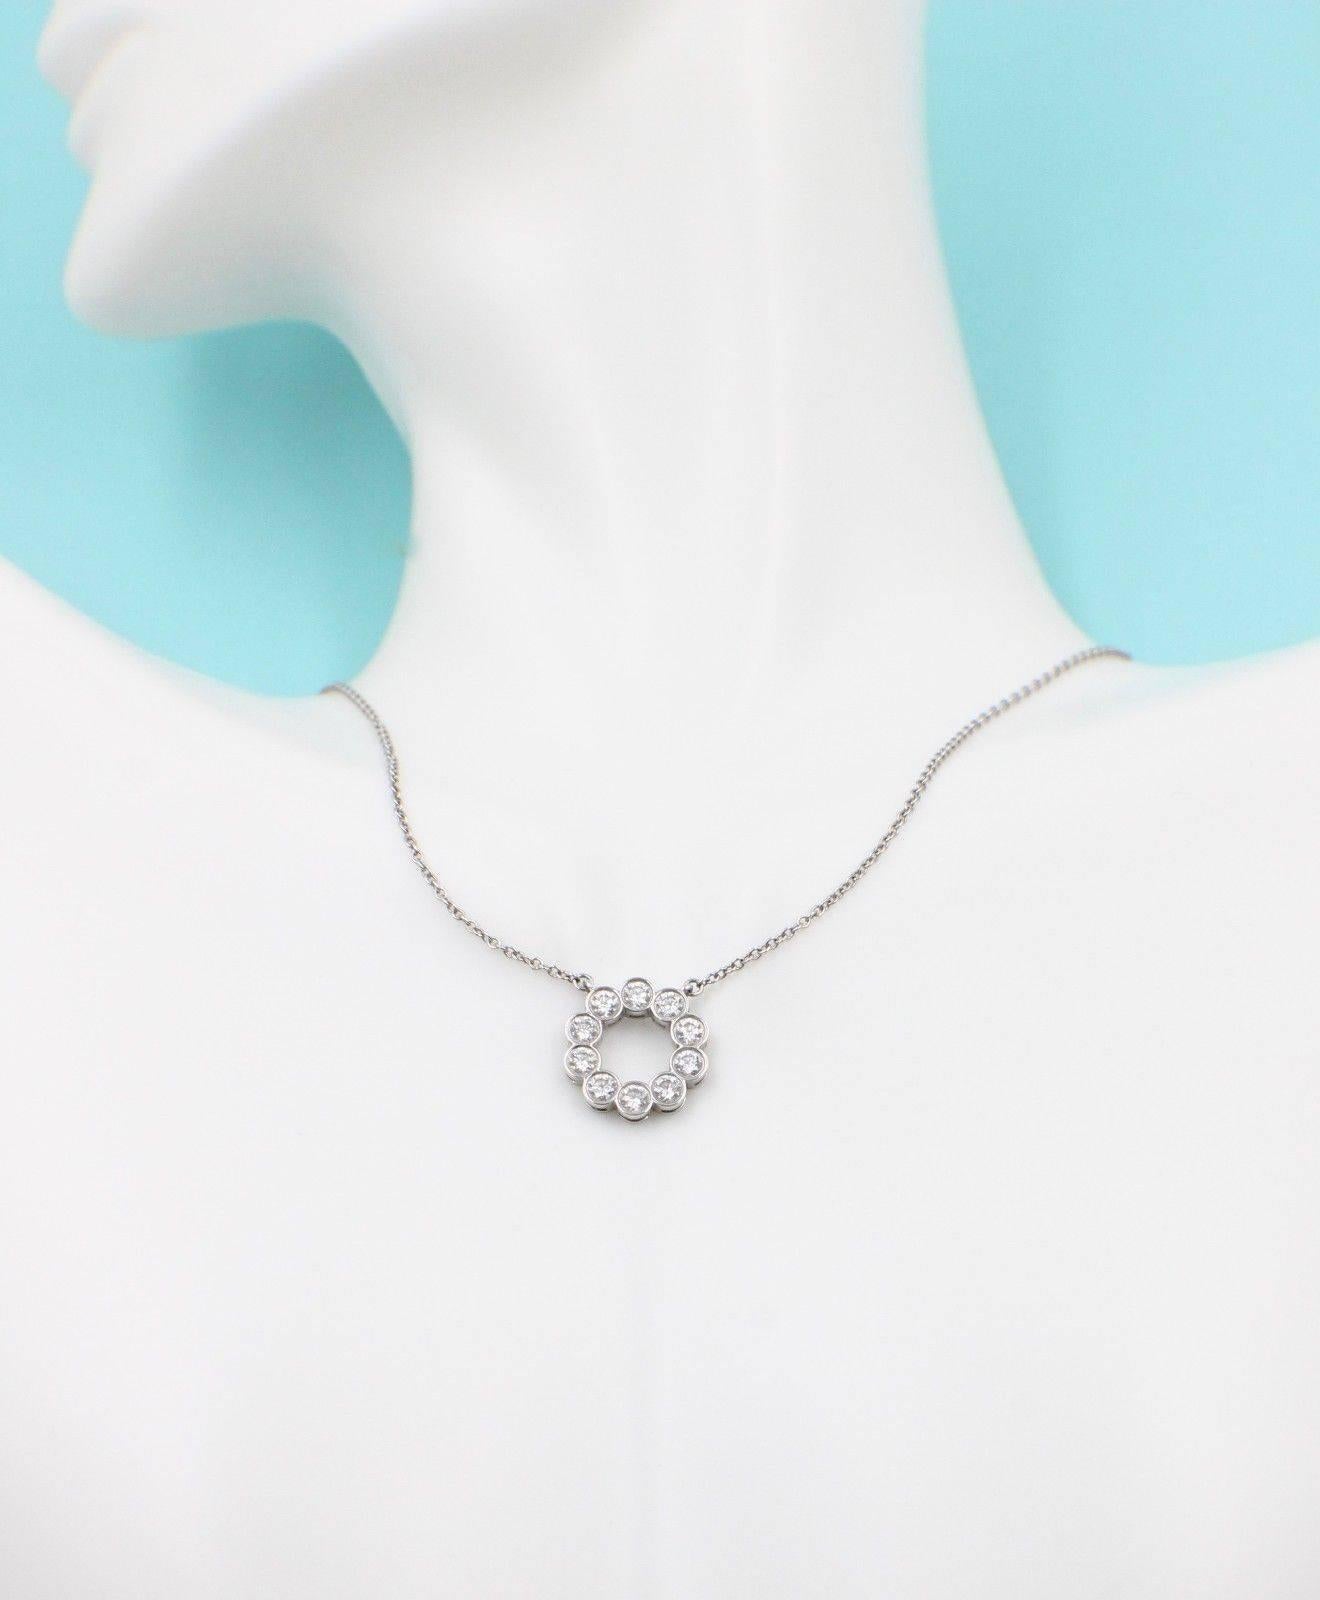 Tiffany & Co. Jazz Round 0.90 Carat Diamond and Platinum Circle Pendant Necklace In Excellent Condition For Sale In San Diego, CA